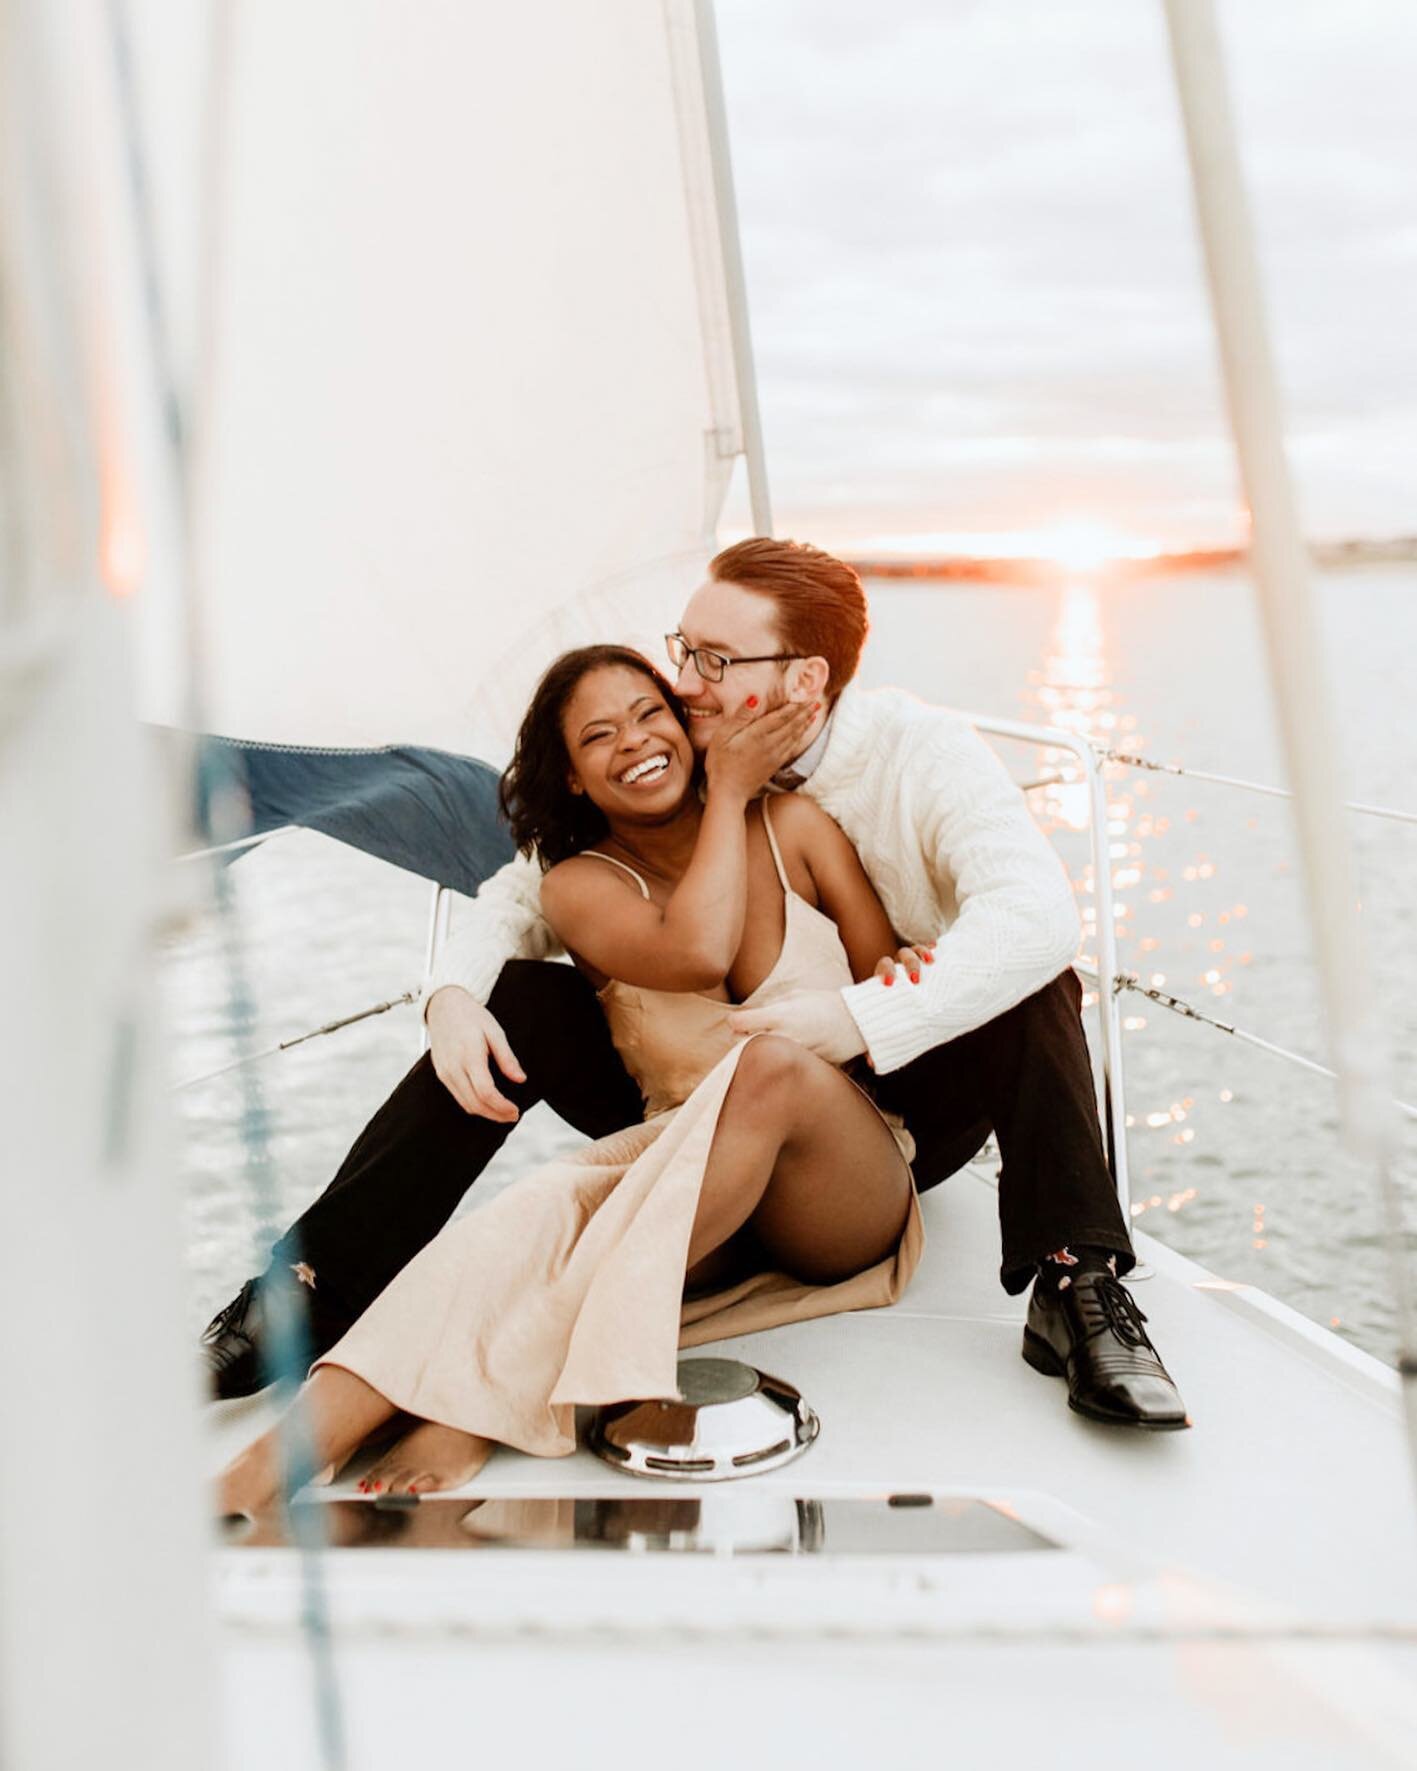 Definitely never getting over the beauty of this session or this couple😭🤍⛵️
*
A big goal of mine in 2021 is to work in/photograph couples in some really unique/new places (especially Yosemite + NYC + Banff), so here&rsquo;s to praying for traveling